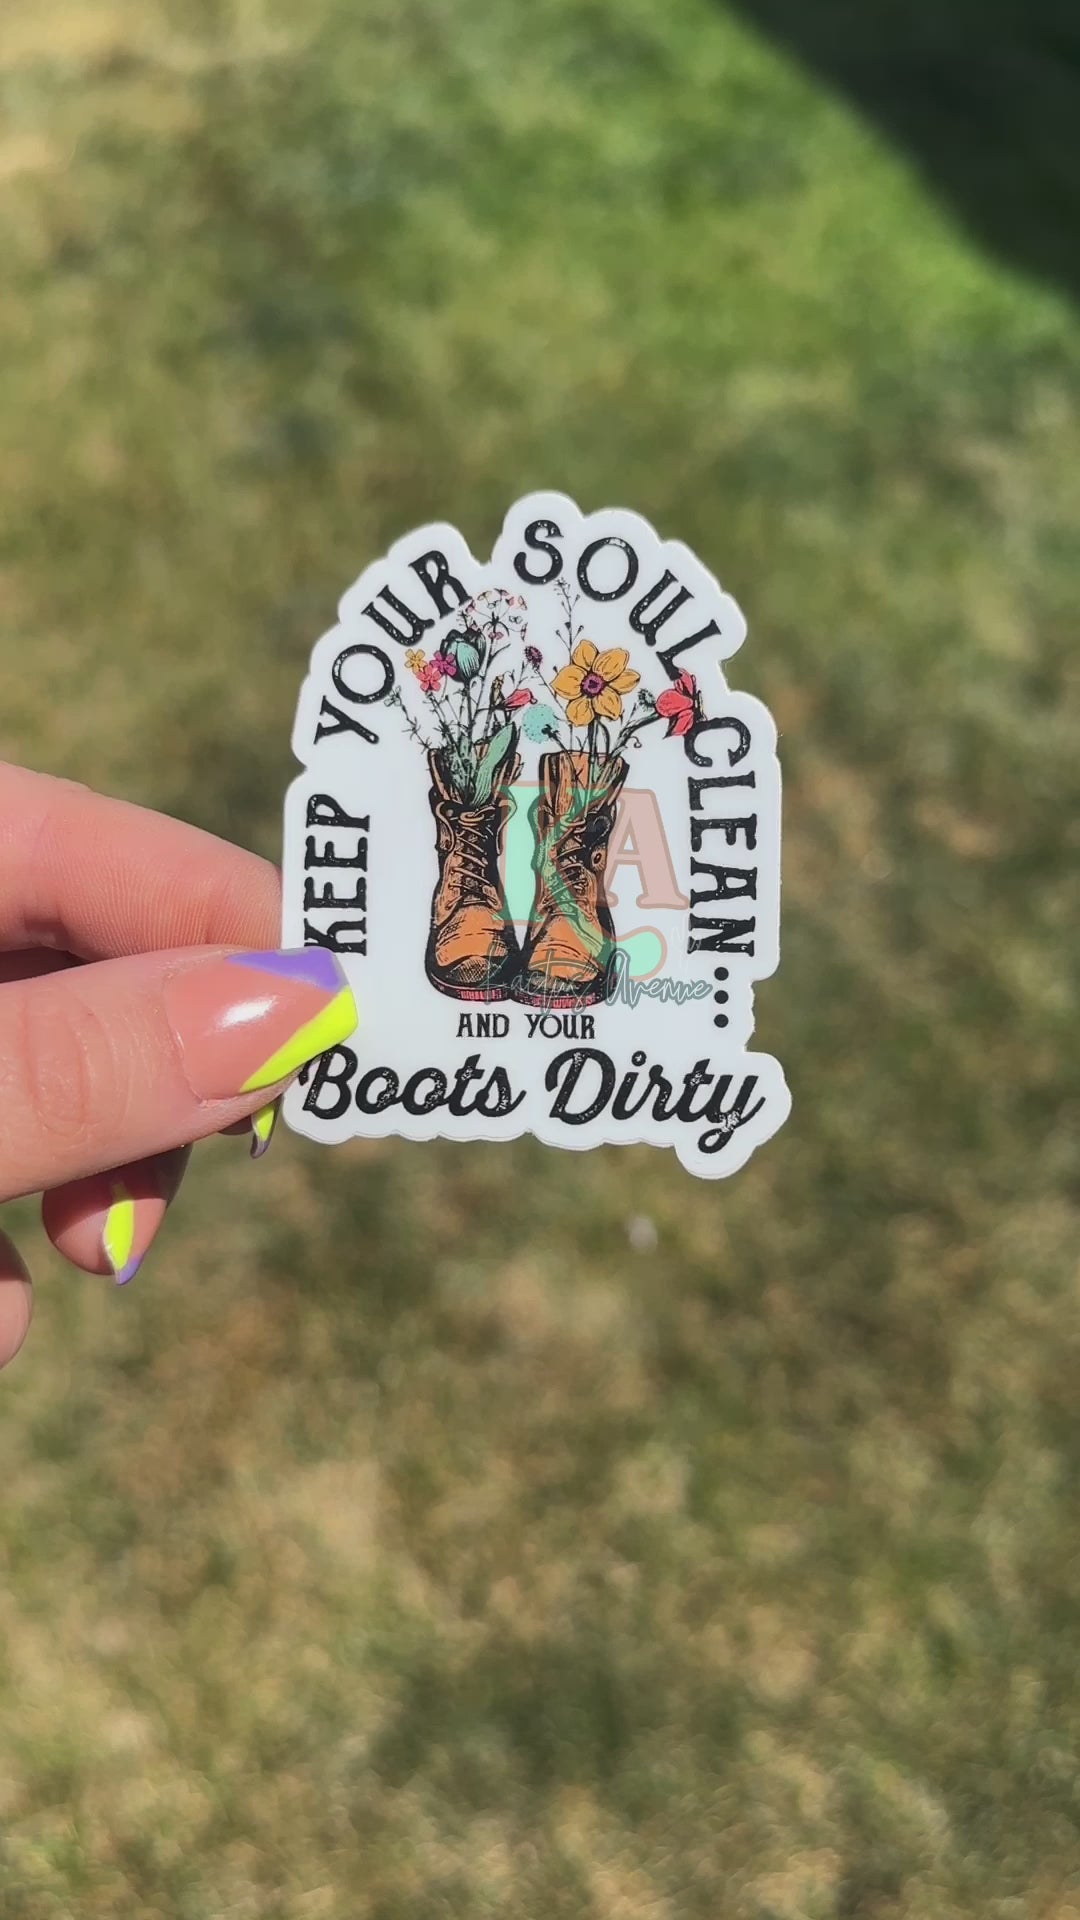 Soul Clean, Boots Dirty Sticker